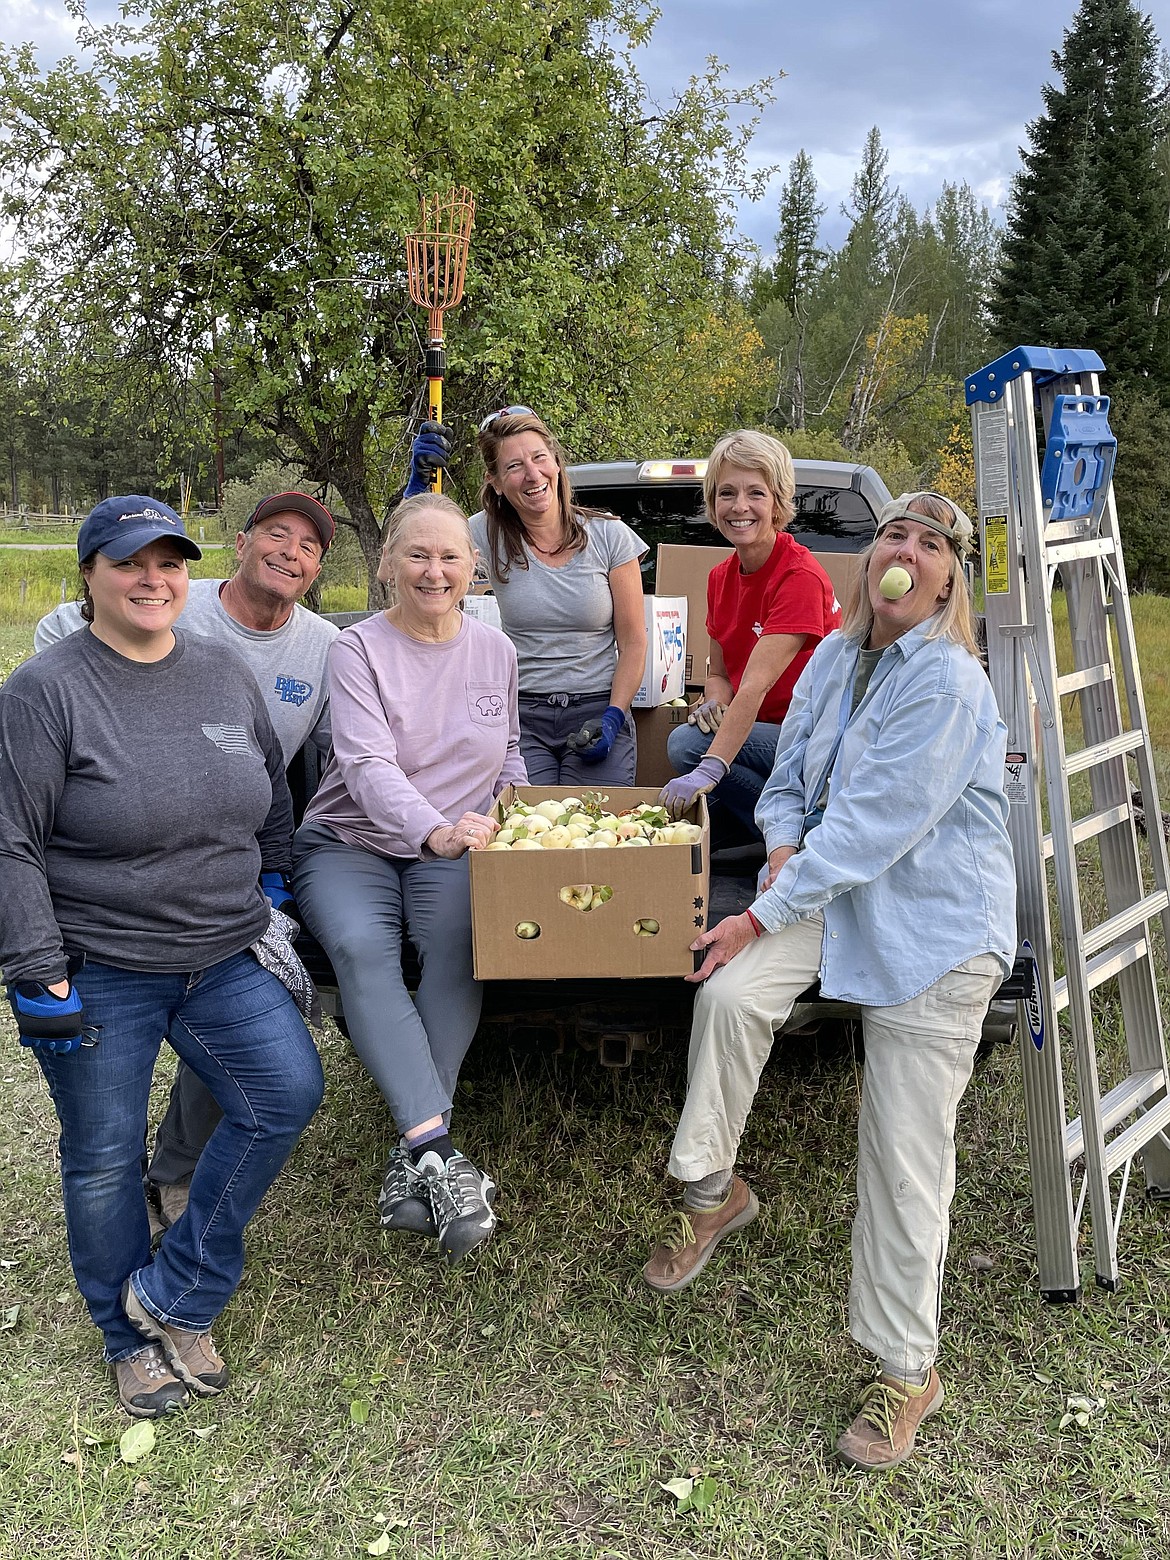 Bear Aware Bigfork volunteers collect fruit last year for donations to the Grizzly and Wolf Discovery Center. (photo provided)